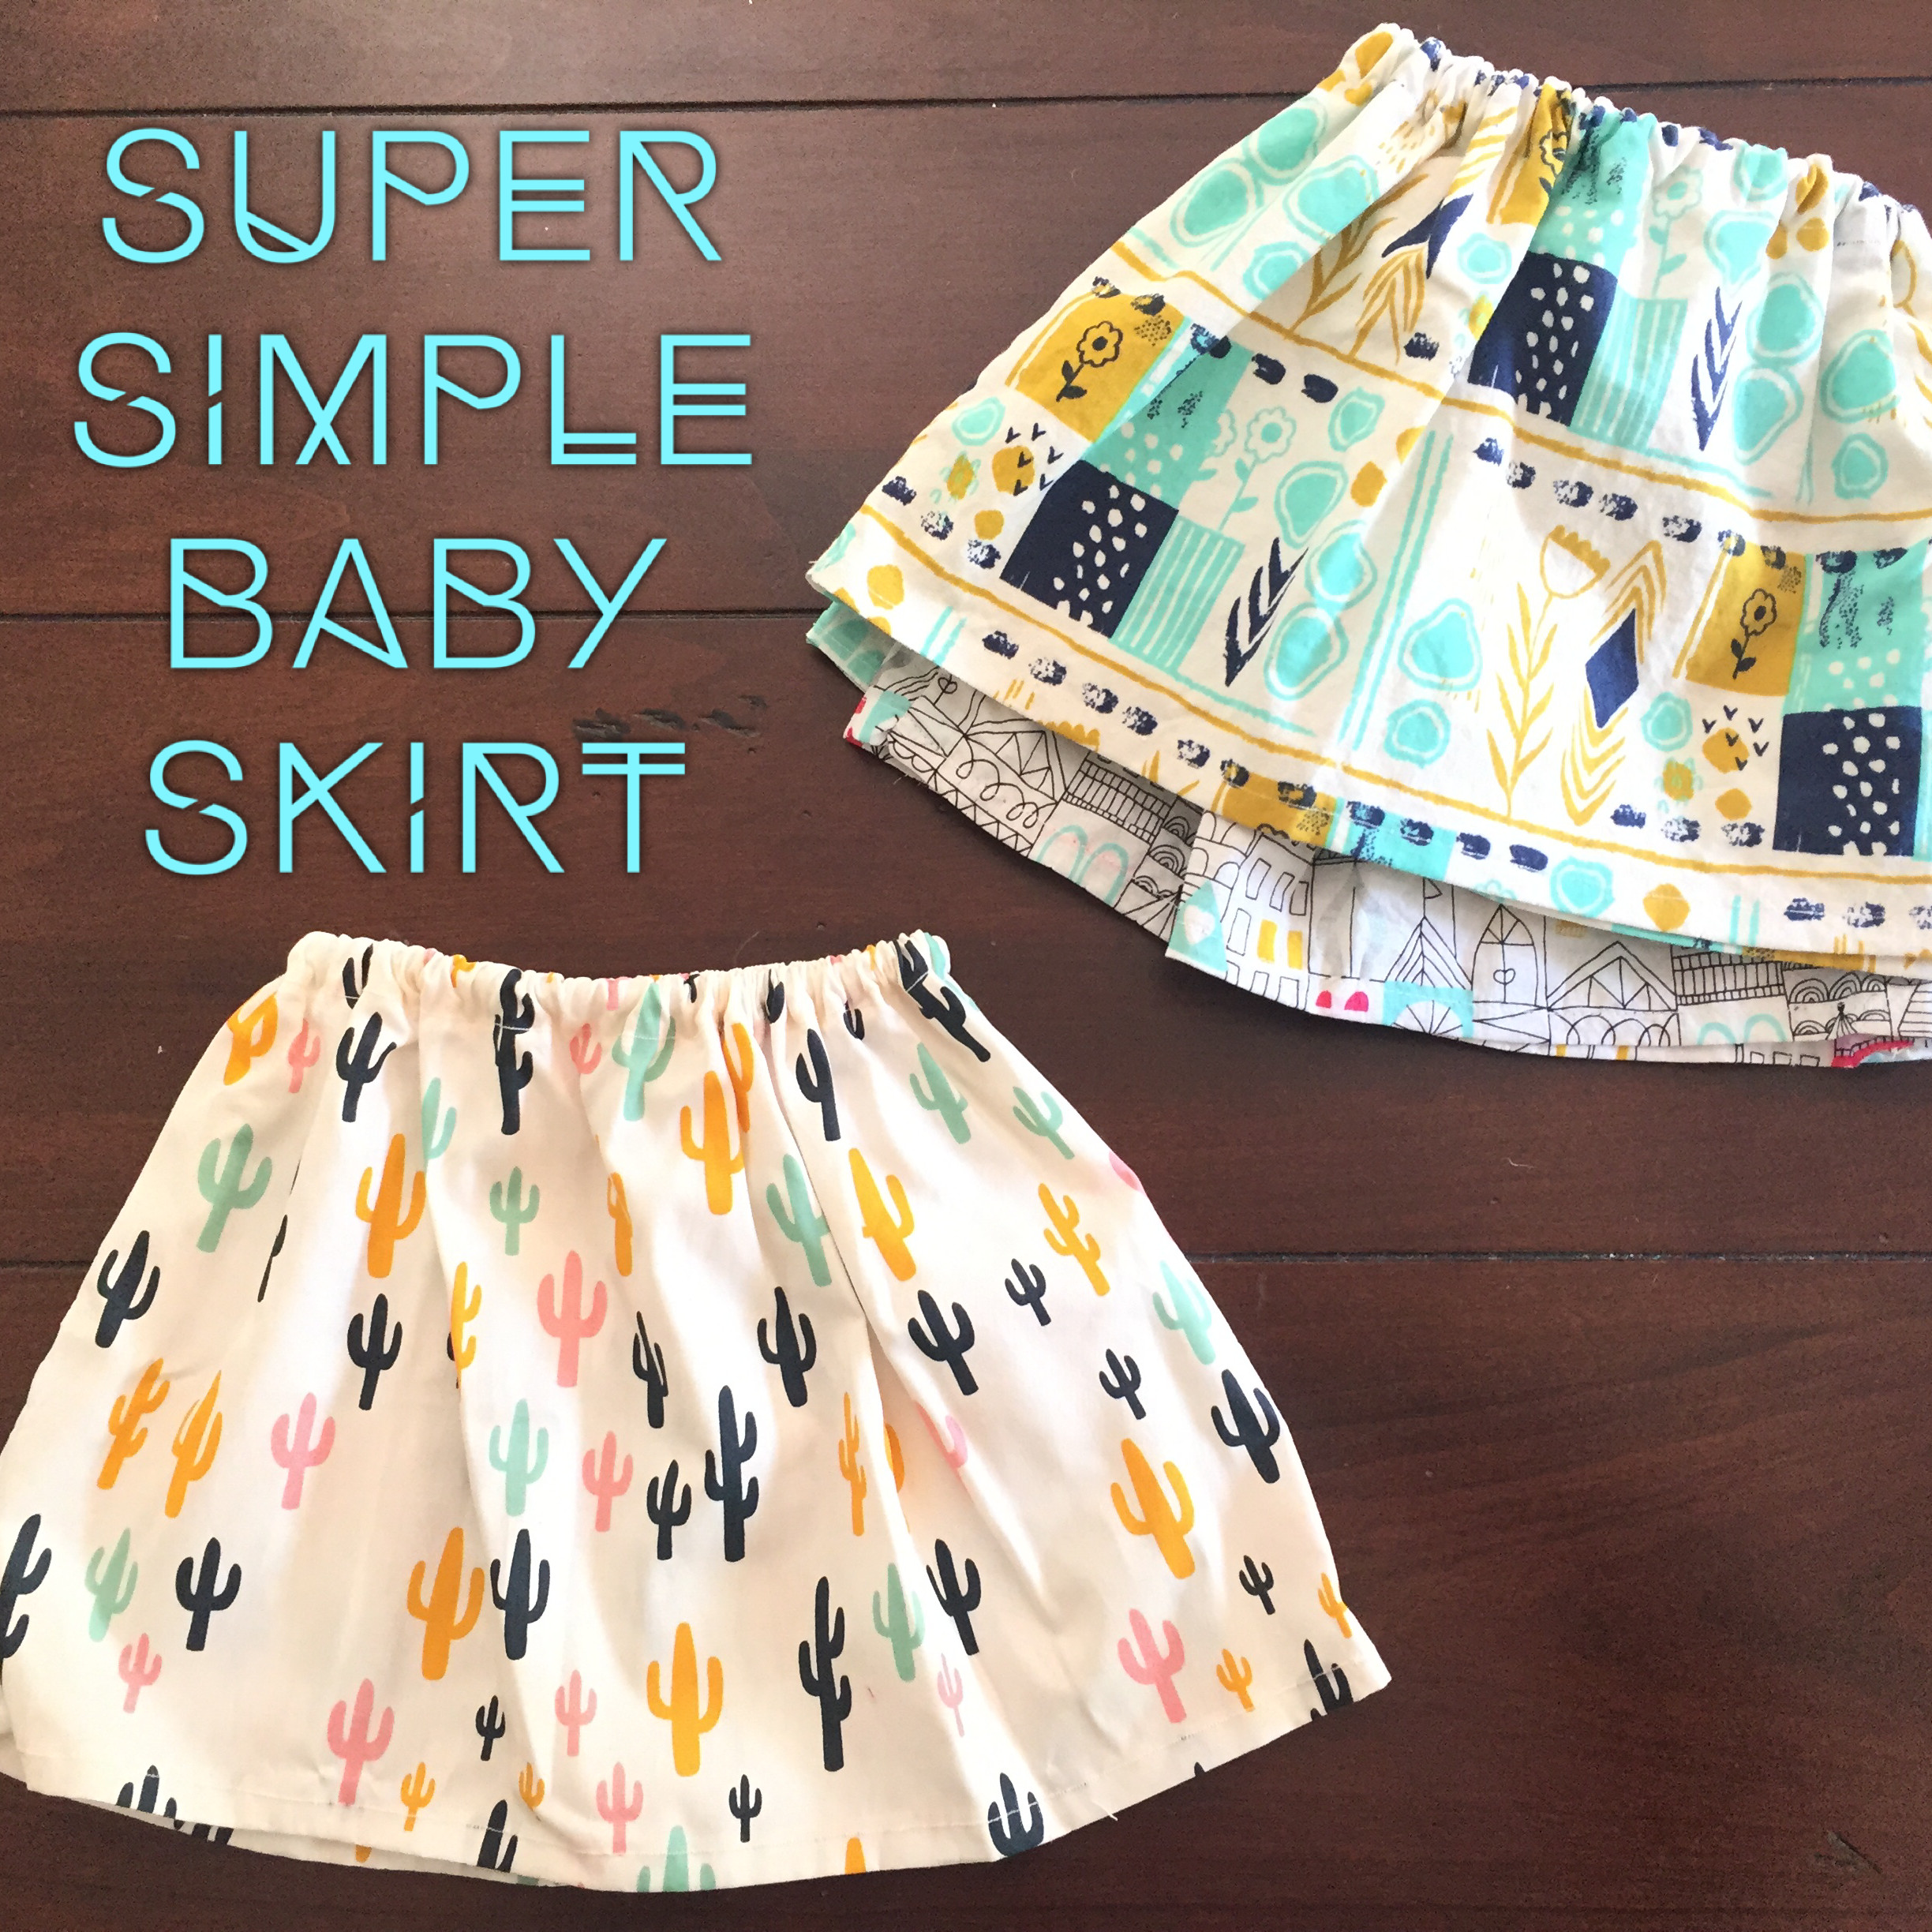 Toddler DIY Projects
 super simple baby skirt sewing project – diy